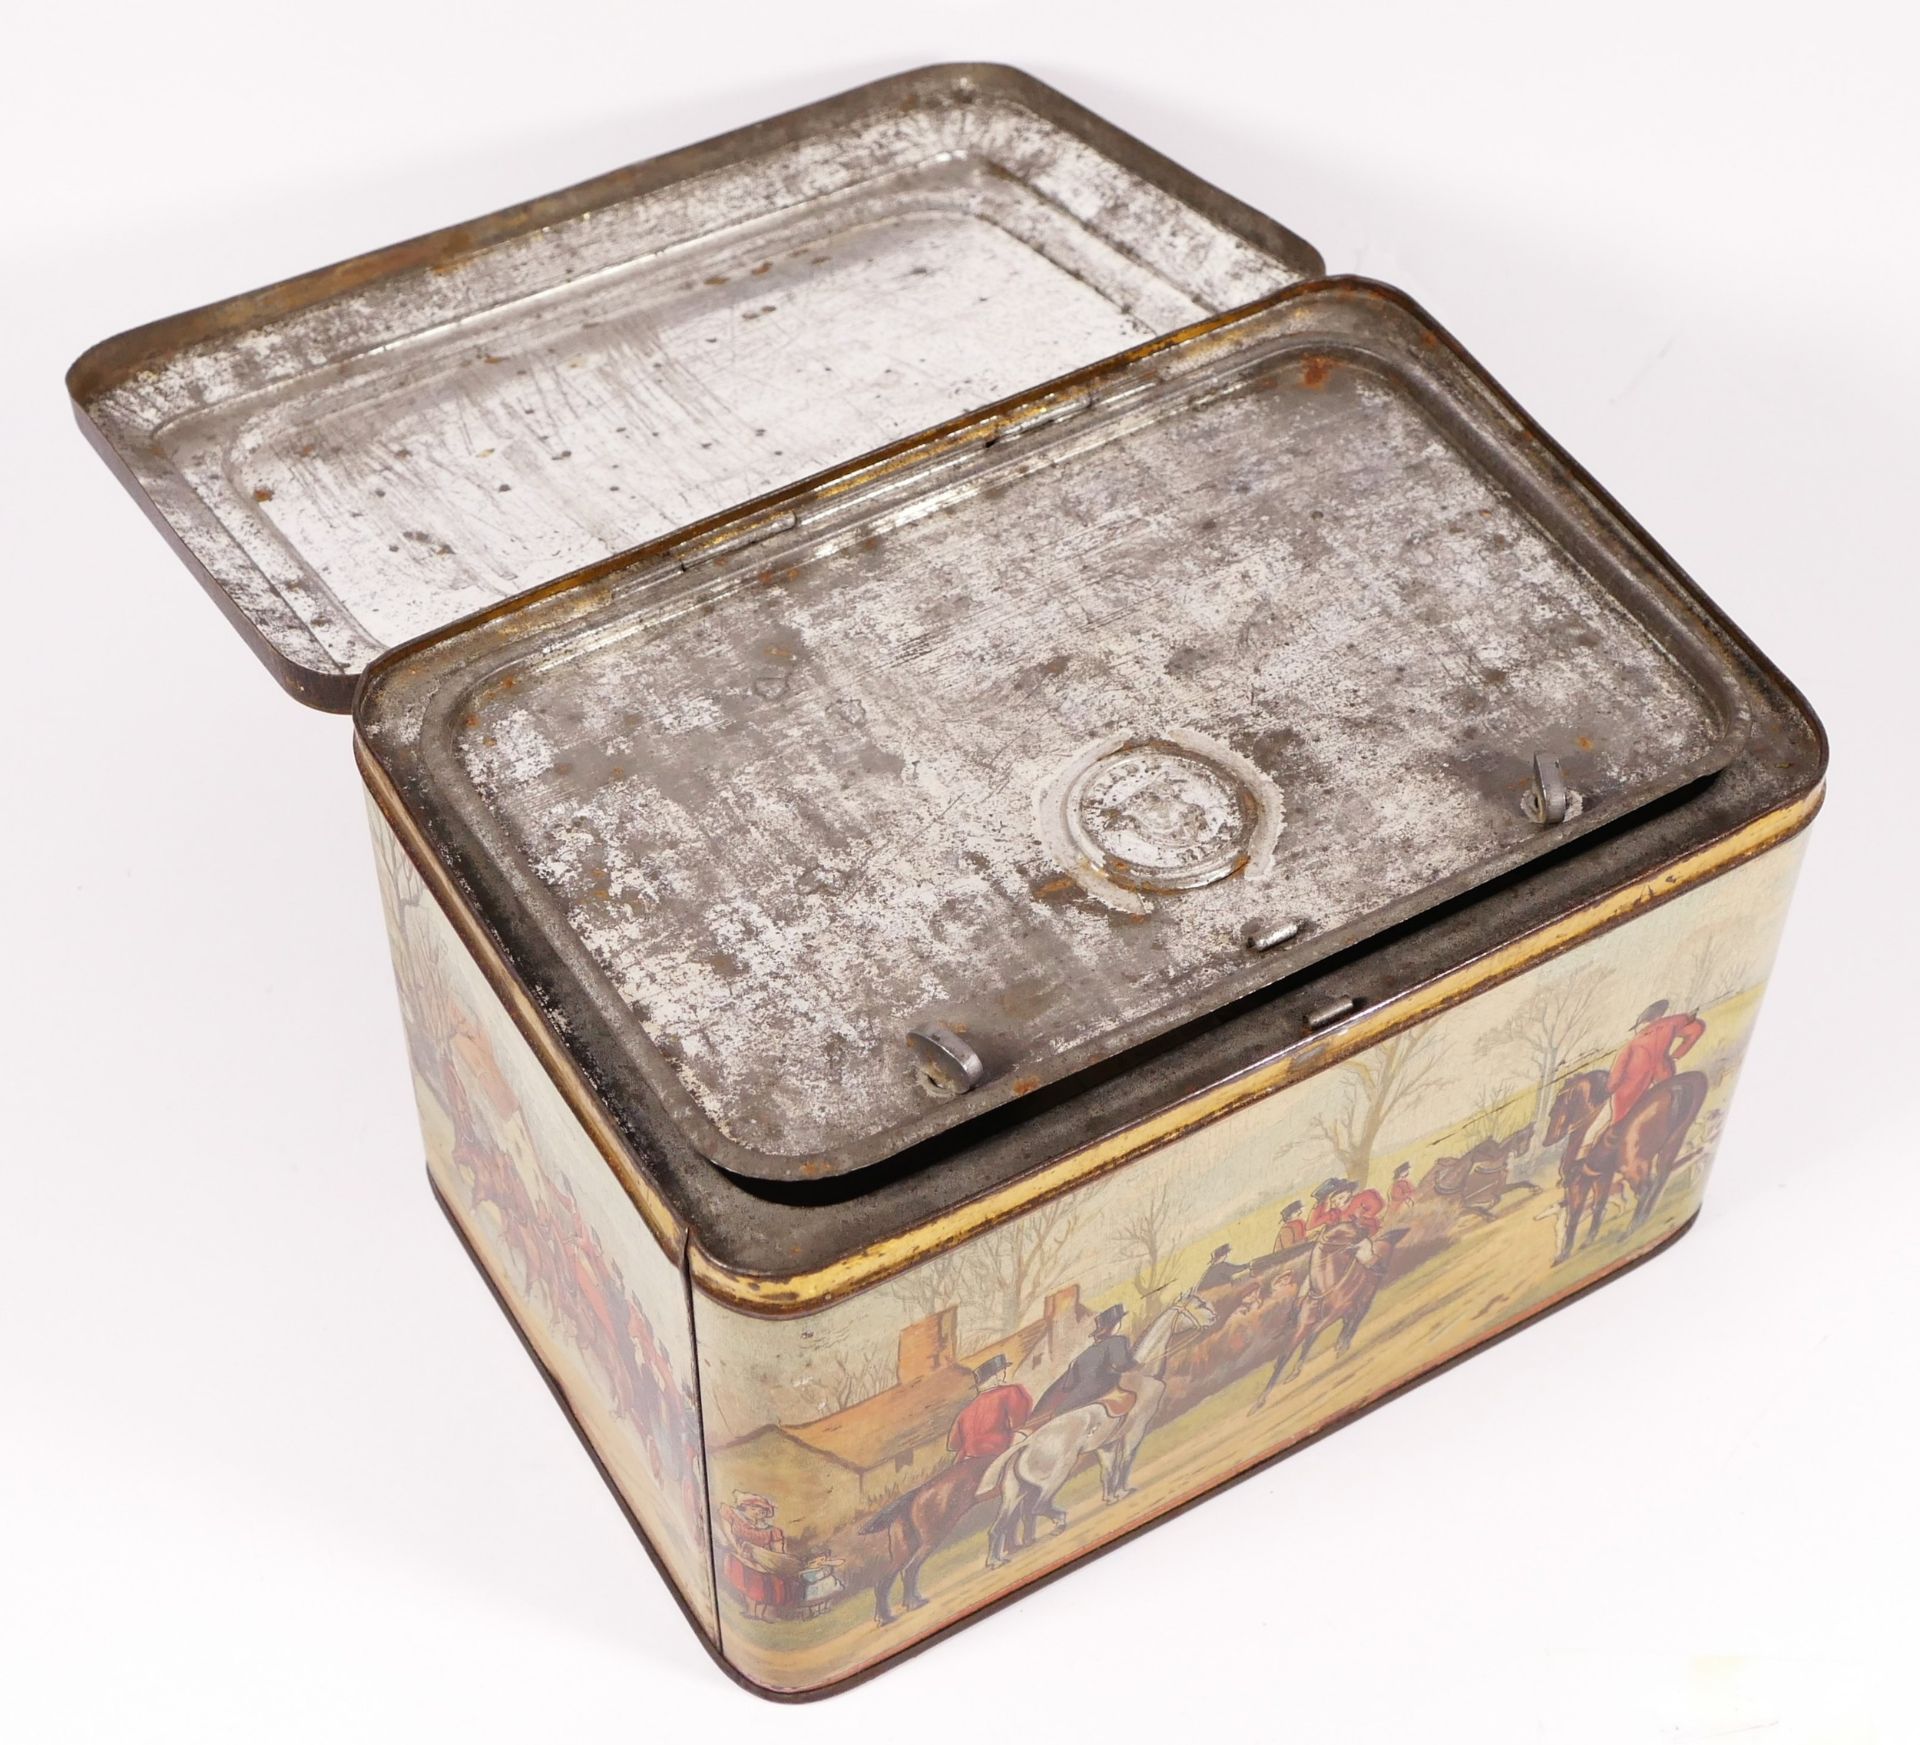 A Victorian Colman's Mustard storage tin, with hunting scene decoration, opening to reveal a inner - Image 3 of 3